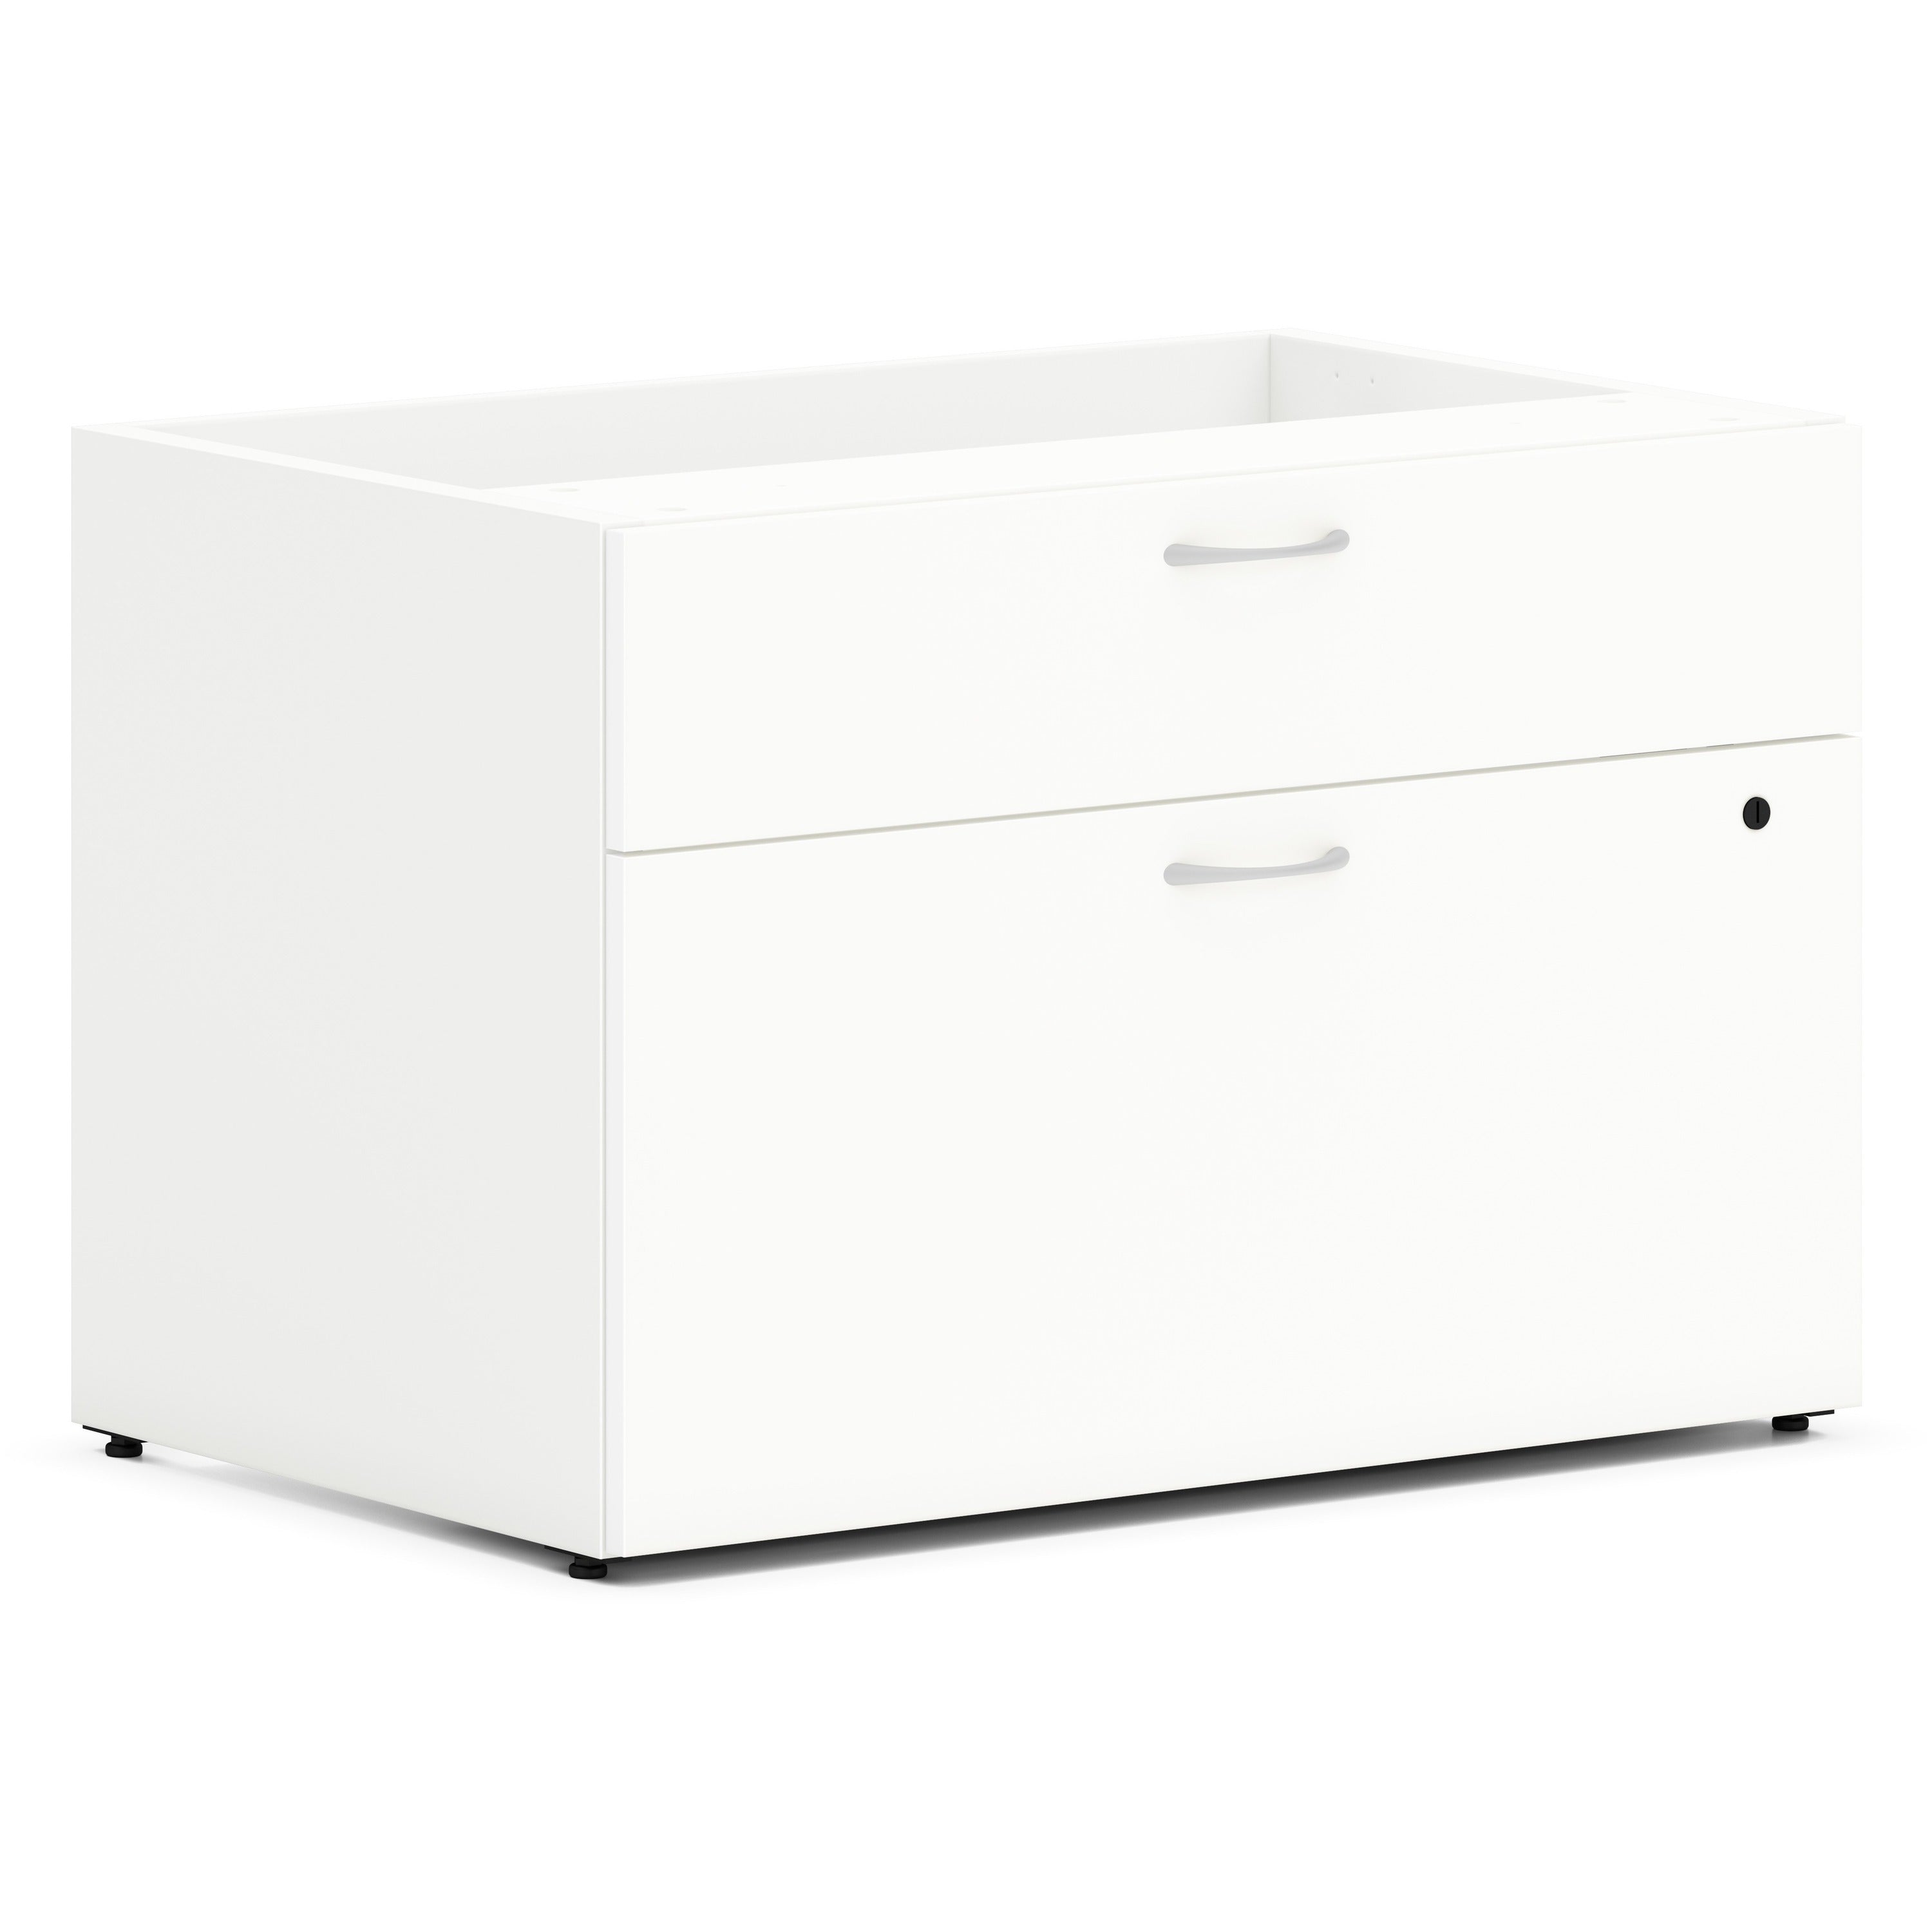 hon-mod-hlplcl3020bf-credenza-30-x-2021-2-drawers-finish-simply-white_honlcl3020bflp1 - 1